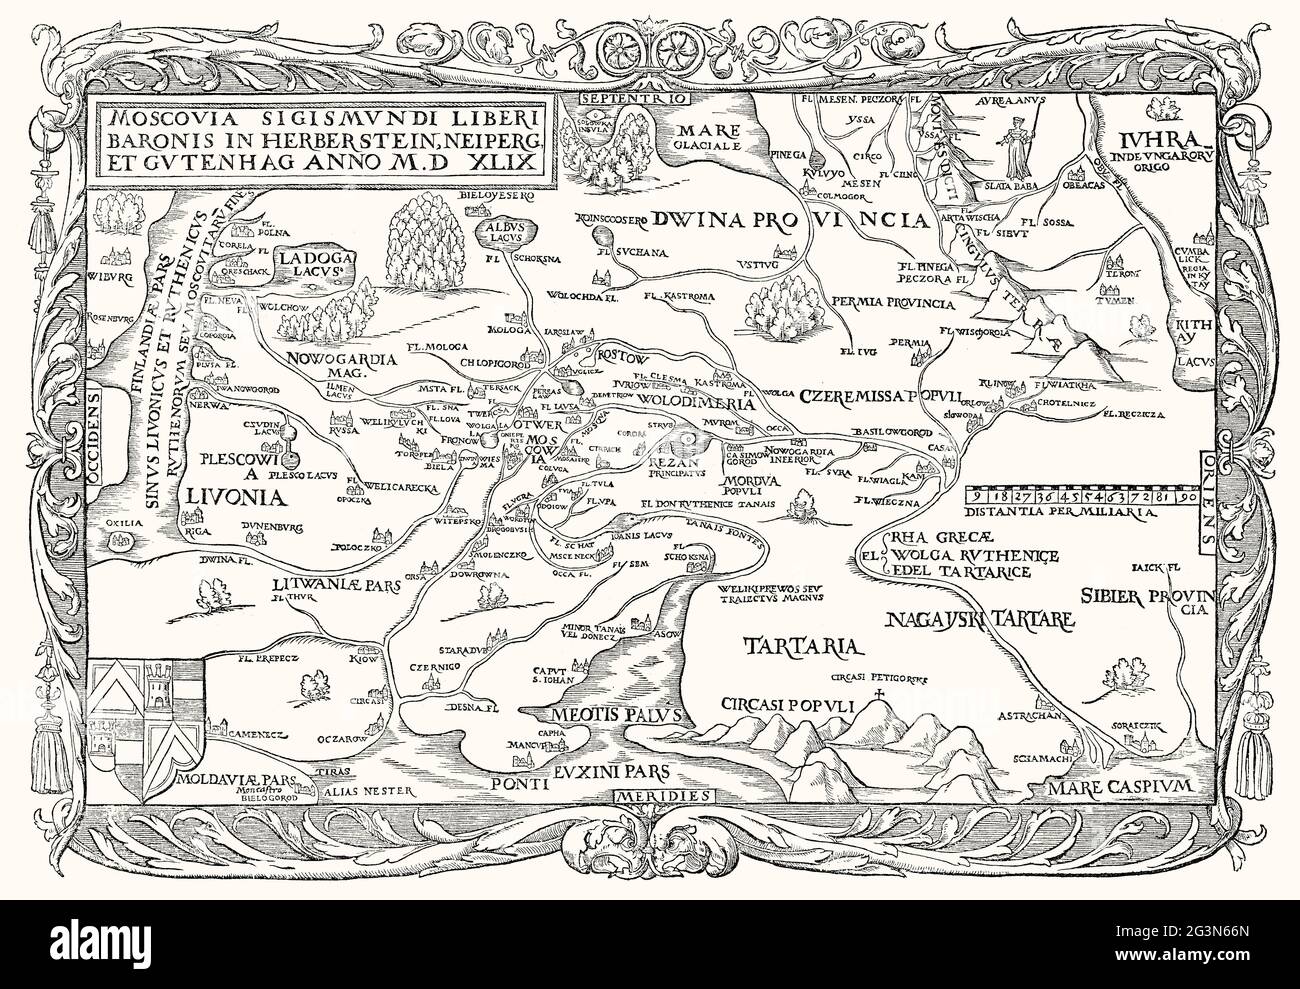 Facsimlile of a map of the Russian Empire by Sigismund von Herberstein, 16th century Stock Photo